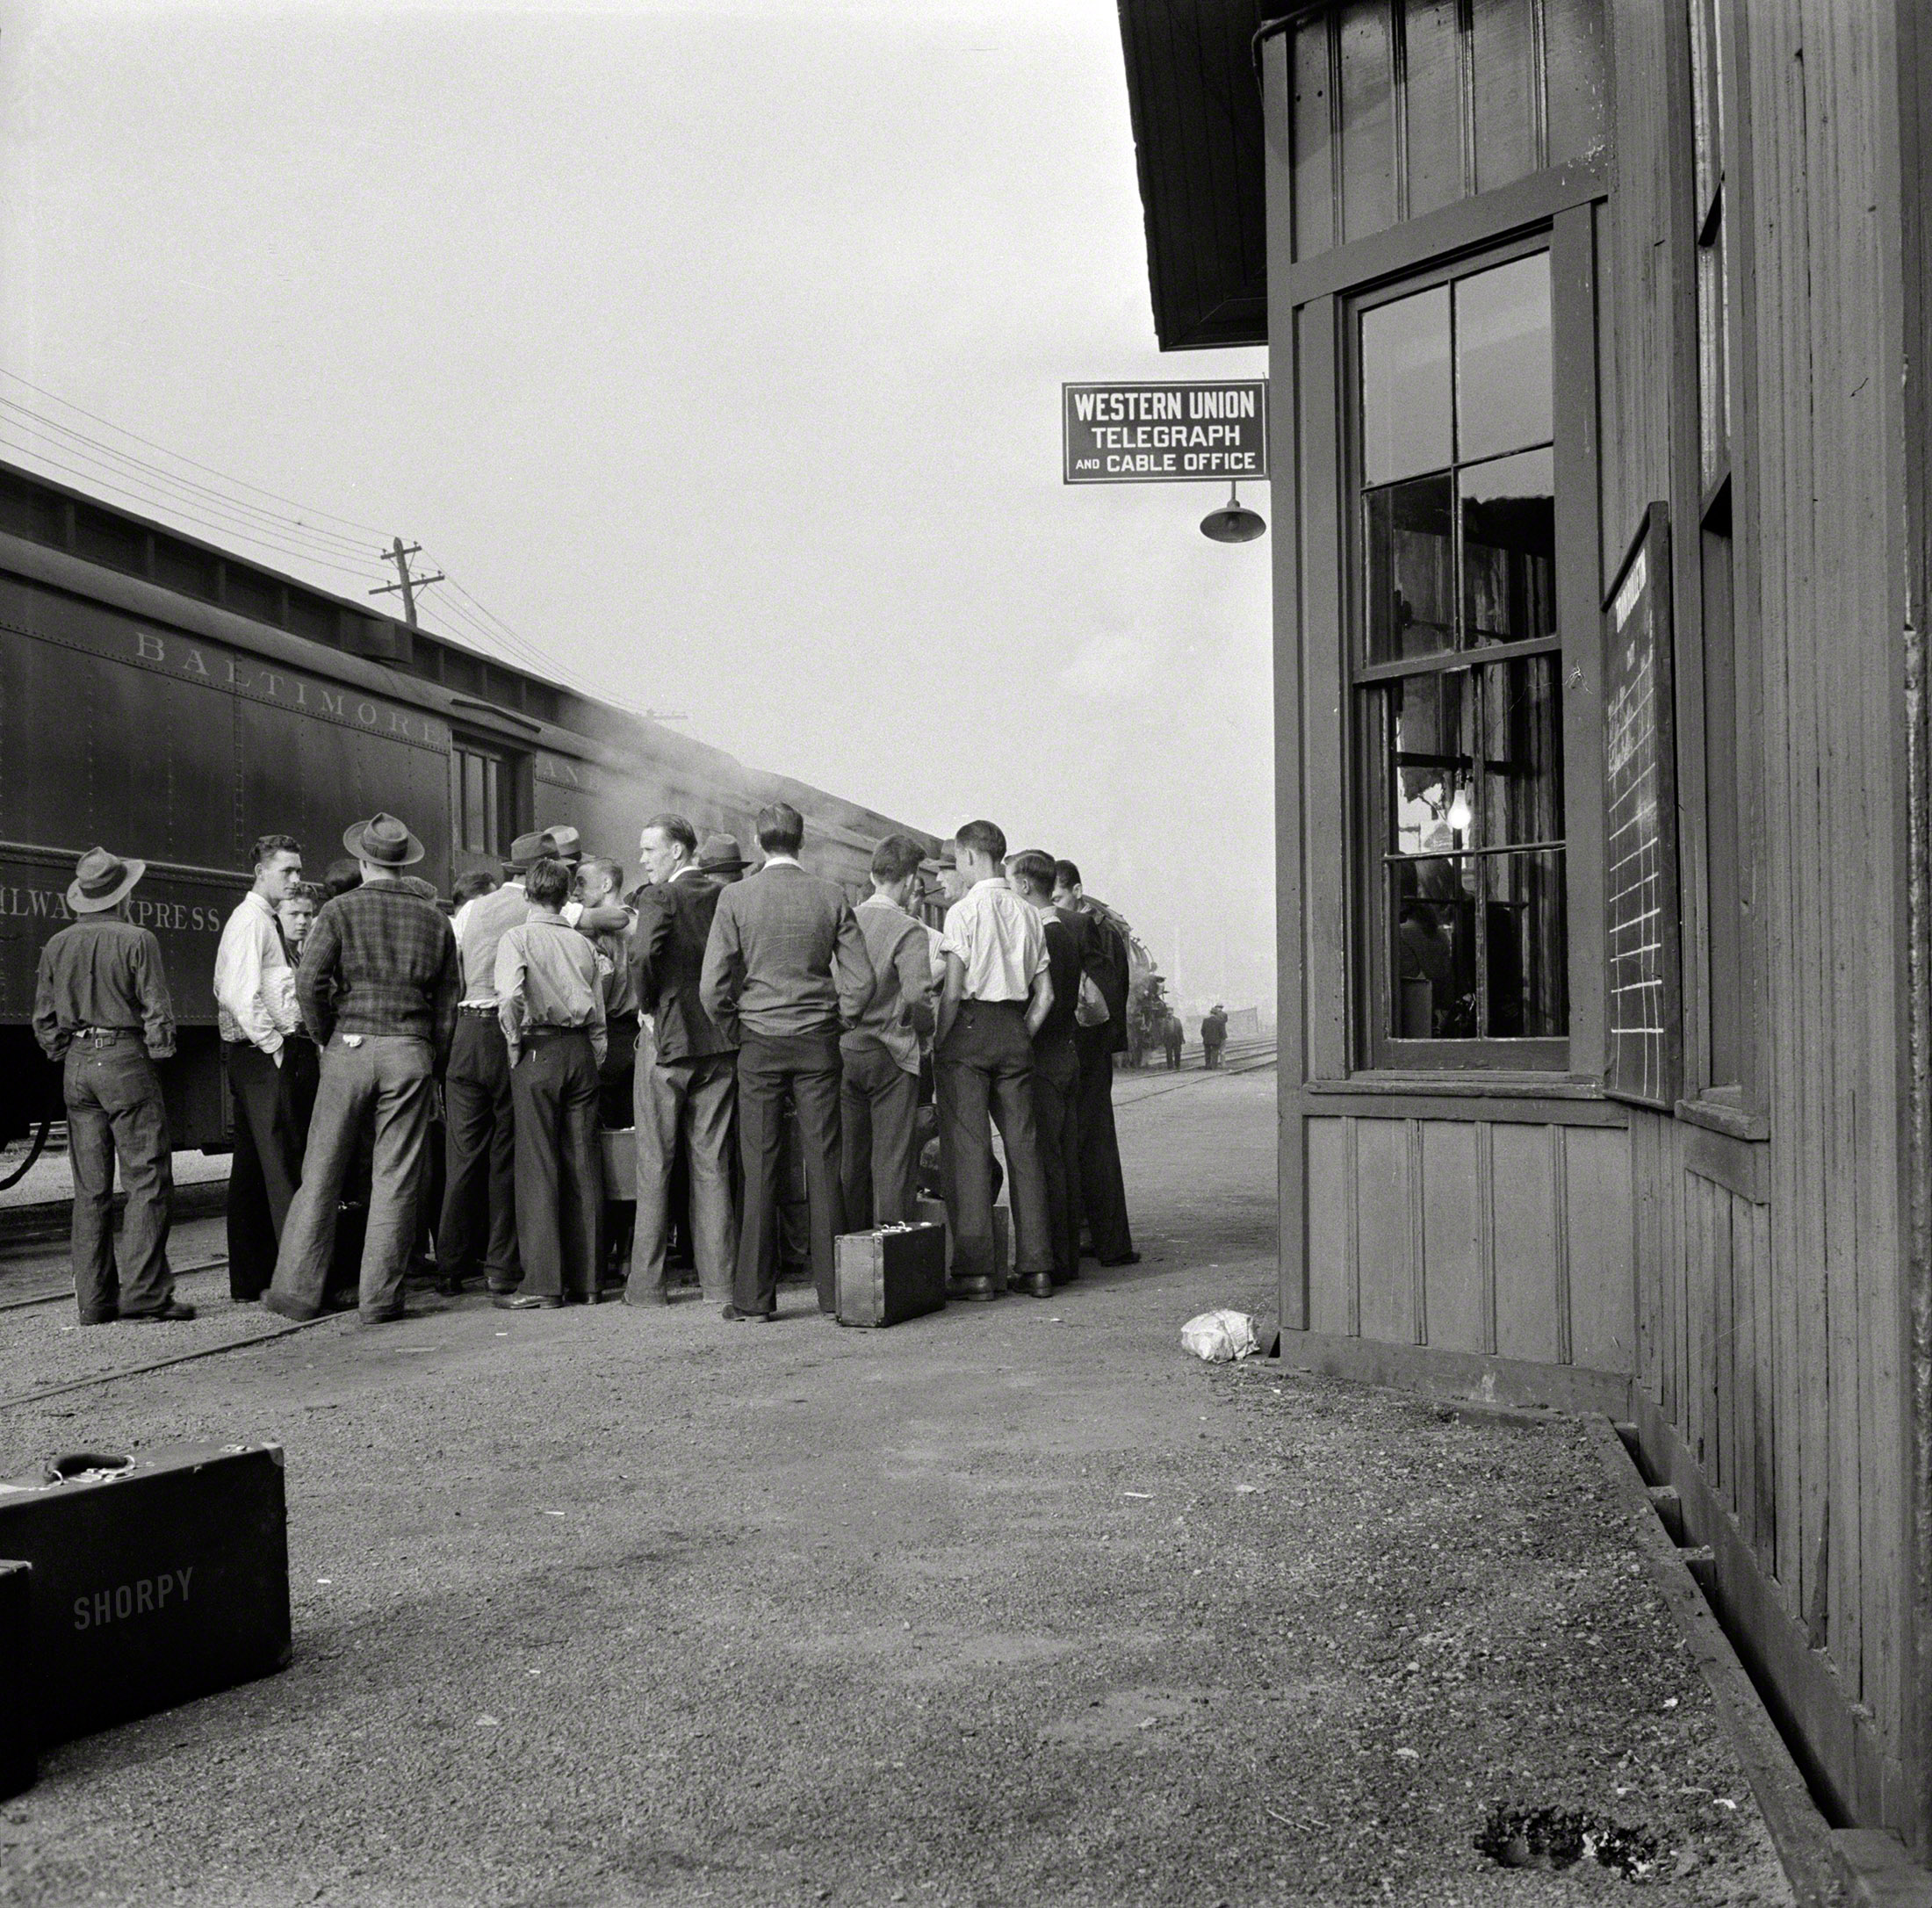 September 1942. "Richwood, W. Va. Station scene at departure of men to help in the harvest in upstate New York." Photo by John Collier. View full size.